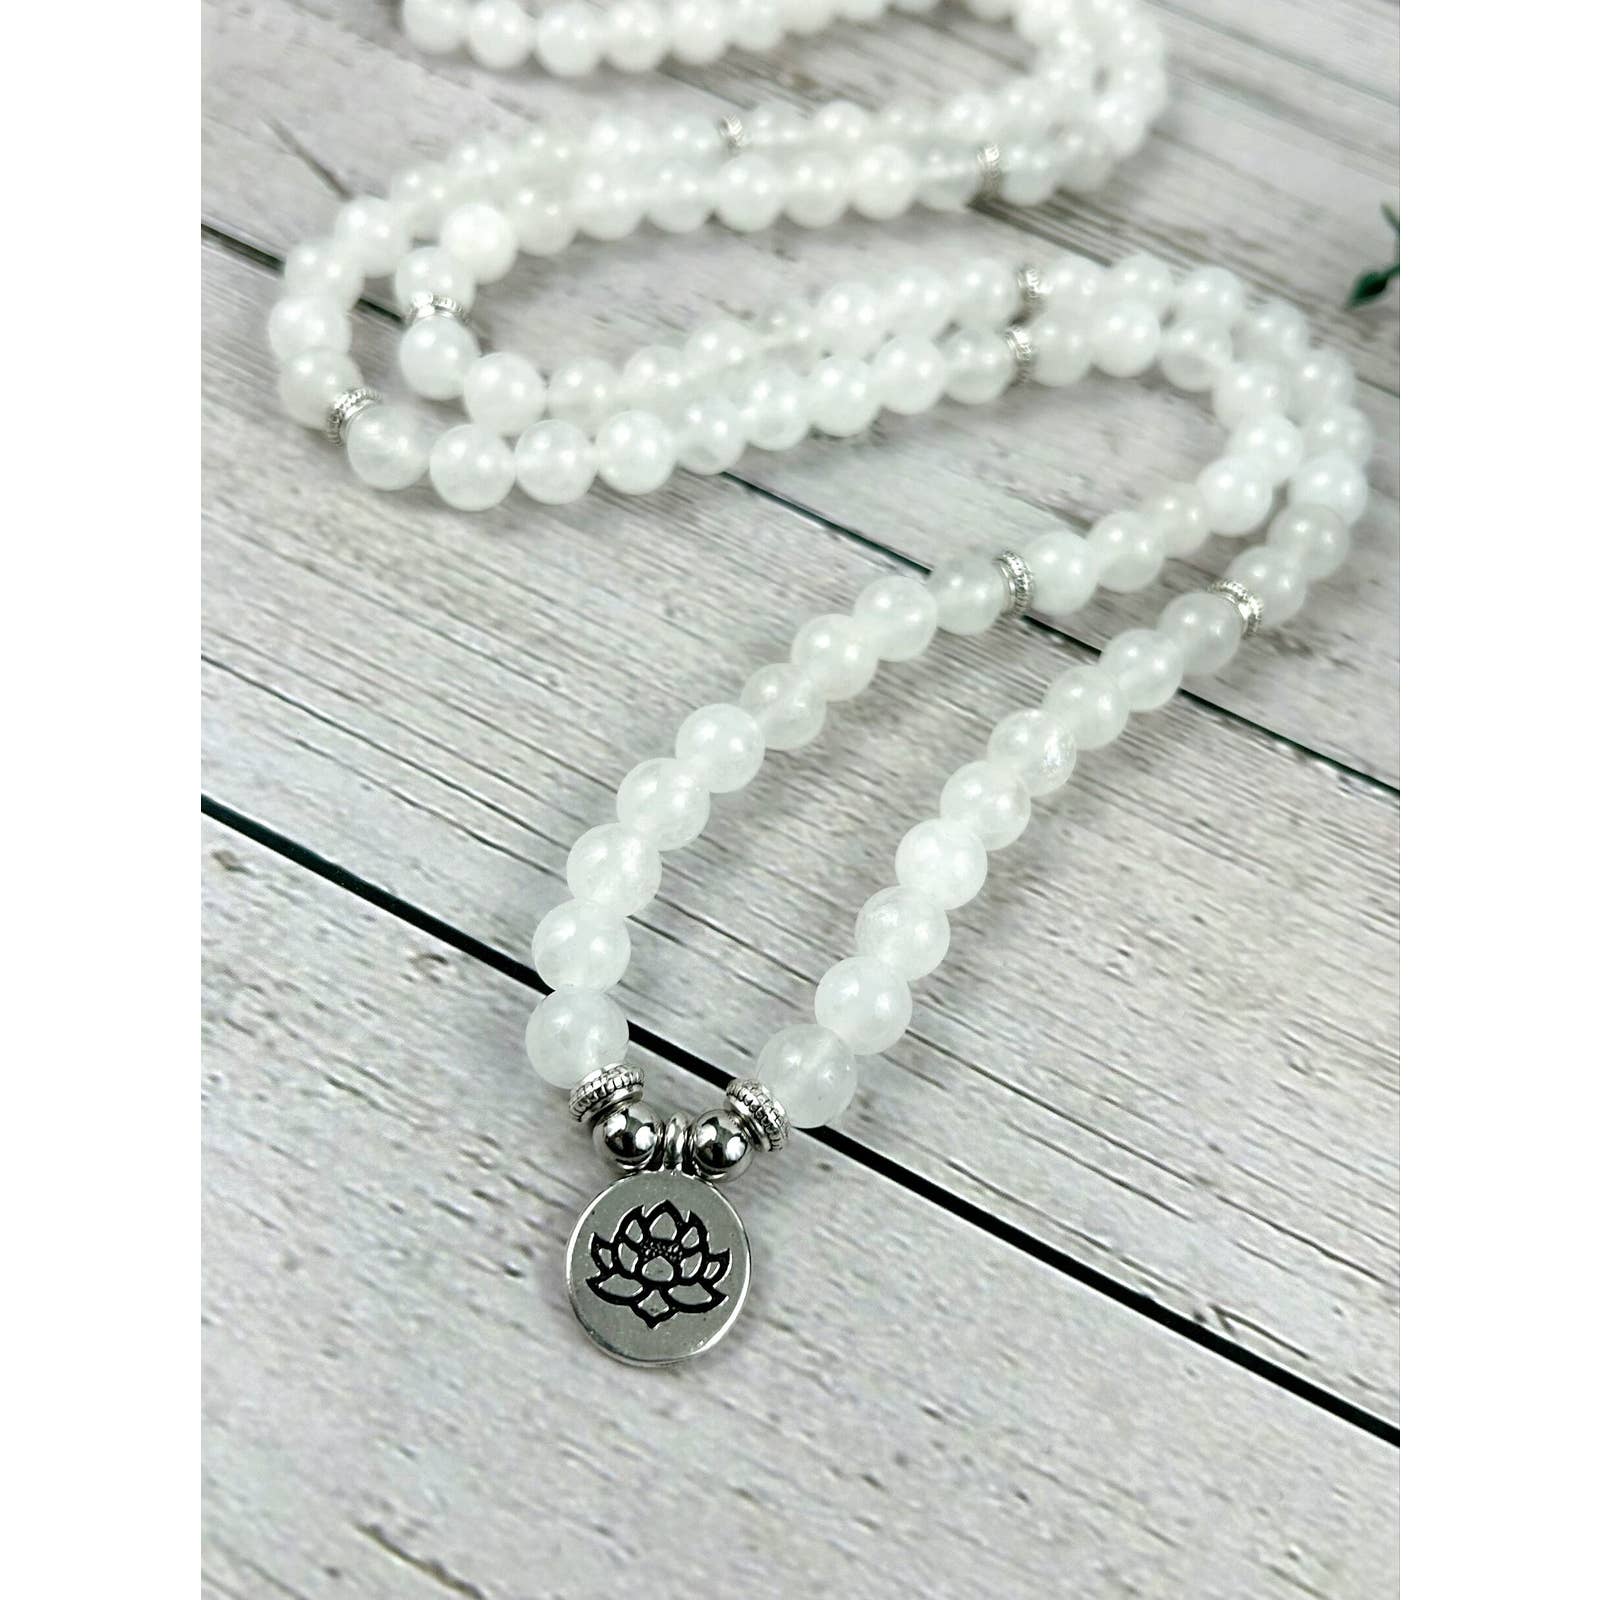 108 Mala Beads Necklace with Moonstone Beads - Meditation Necklace